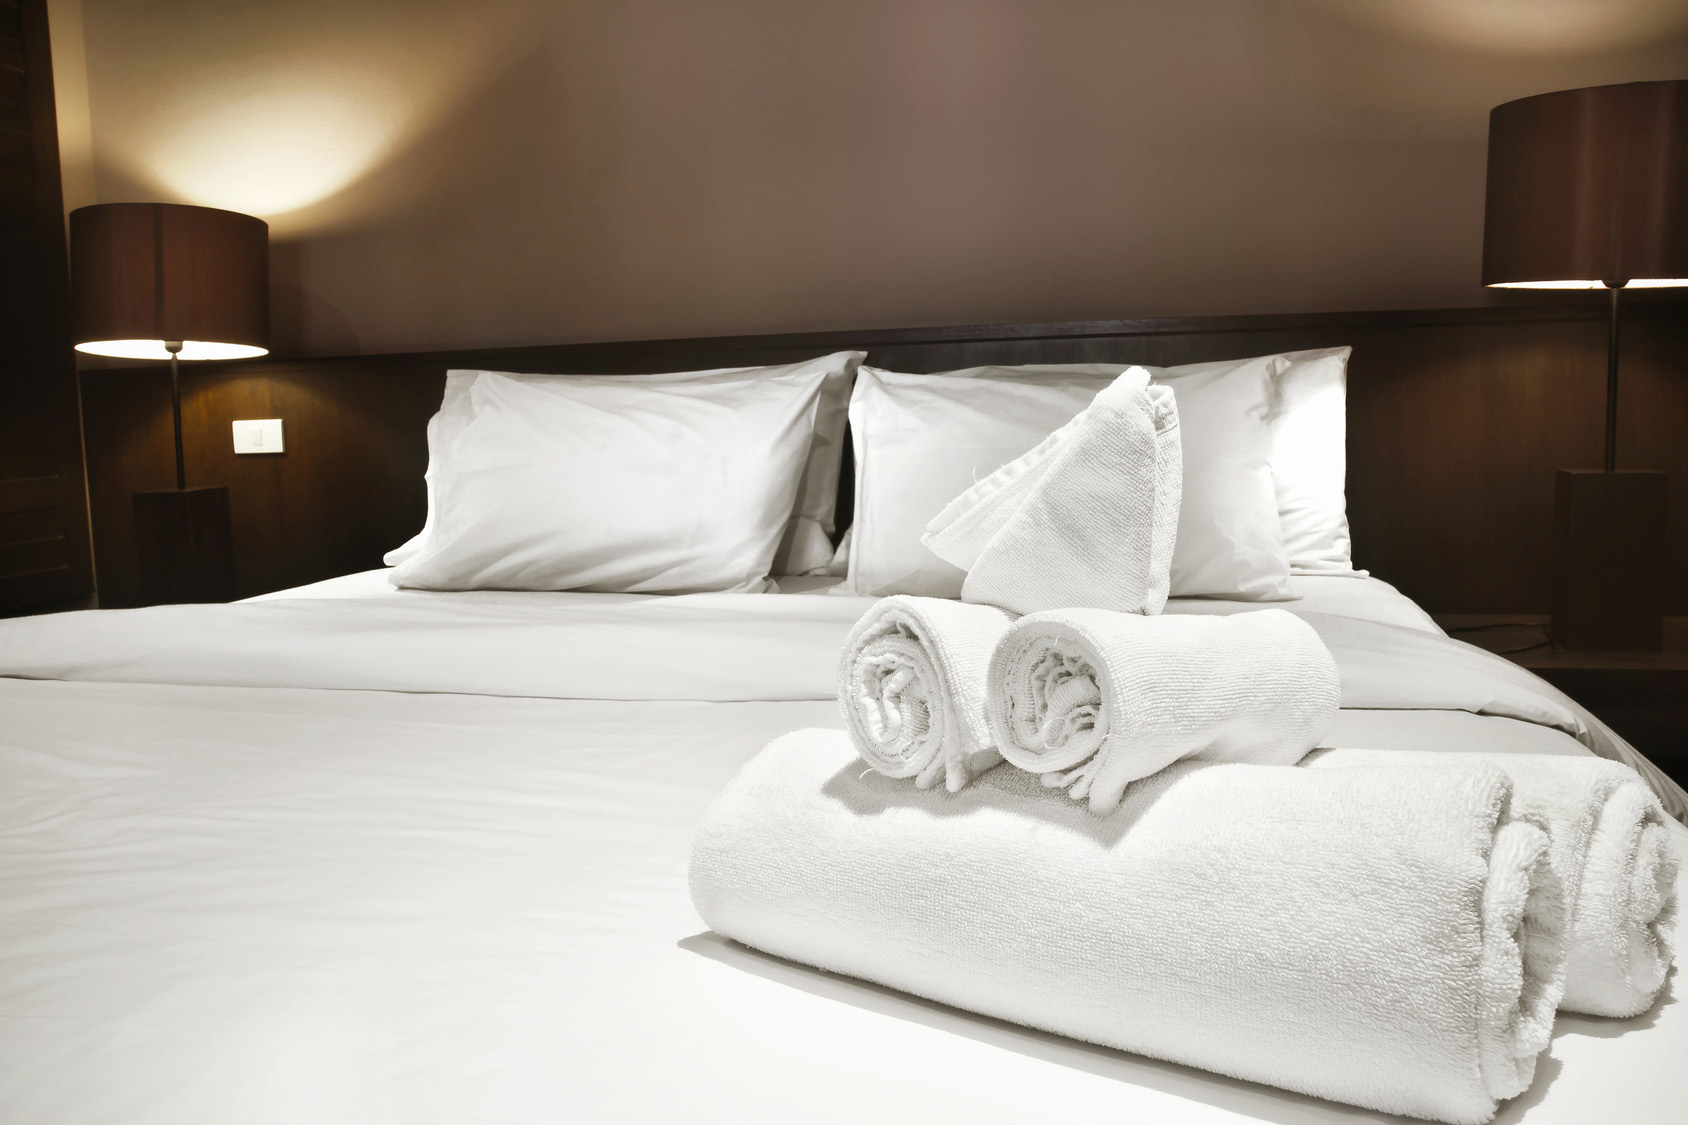 Bedding and towel rental